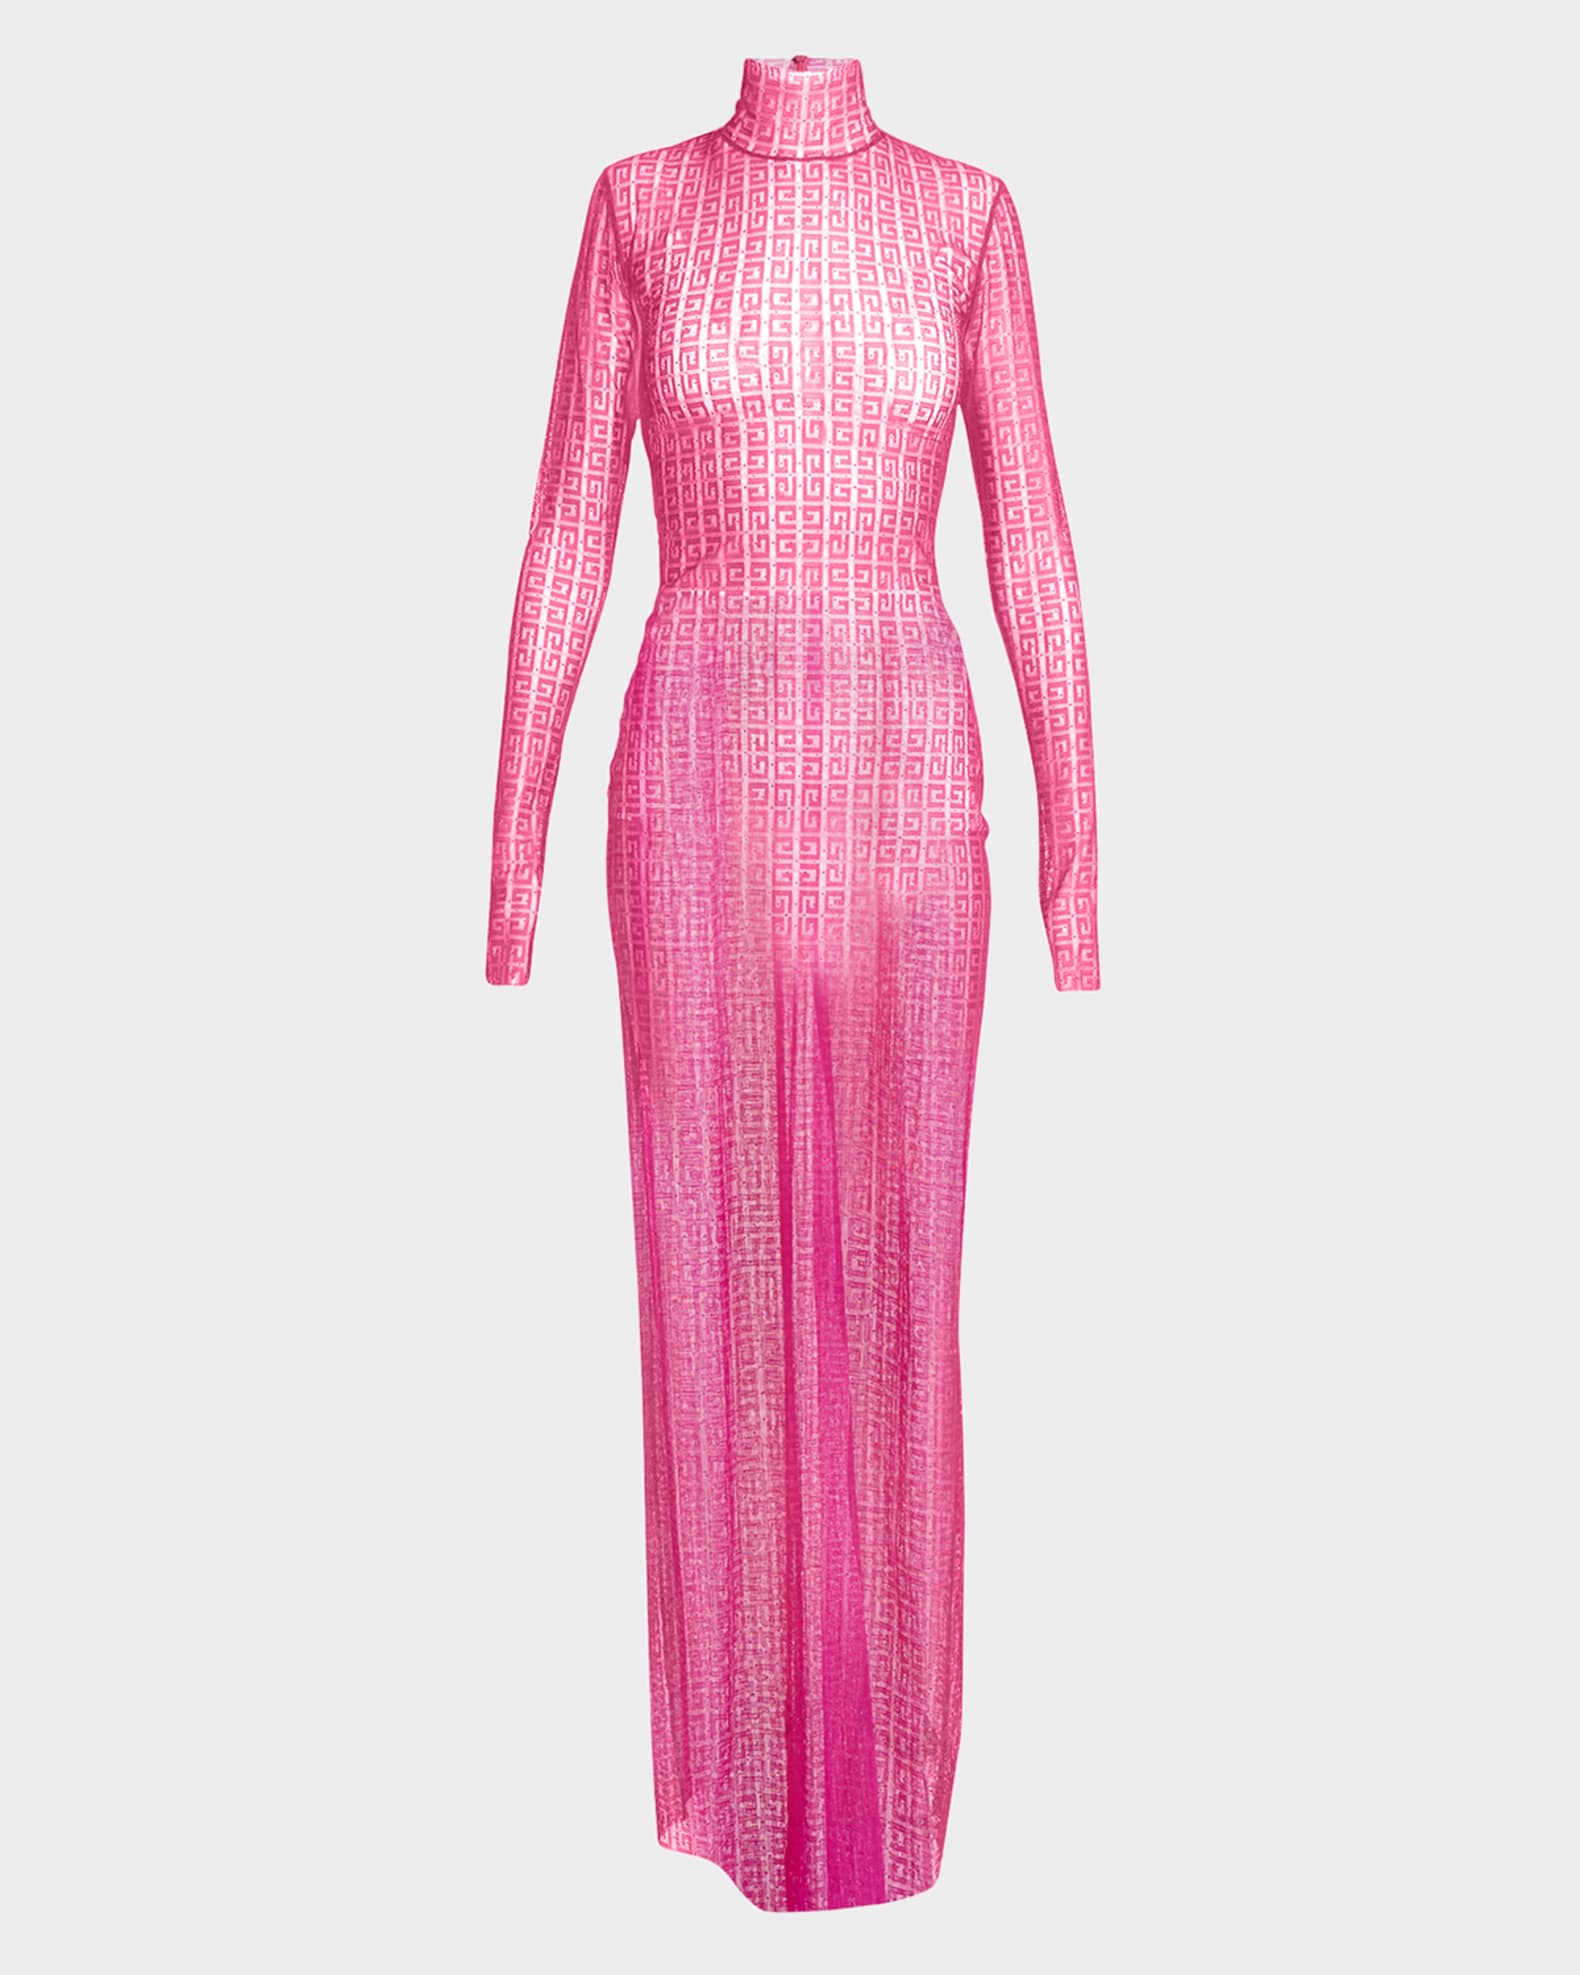 Givenchy 4G Print Sheer Tulle Dress | Neiman Marcus